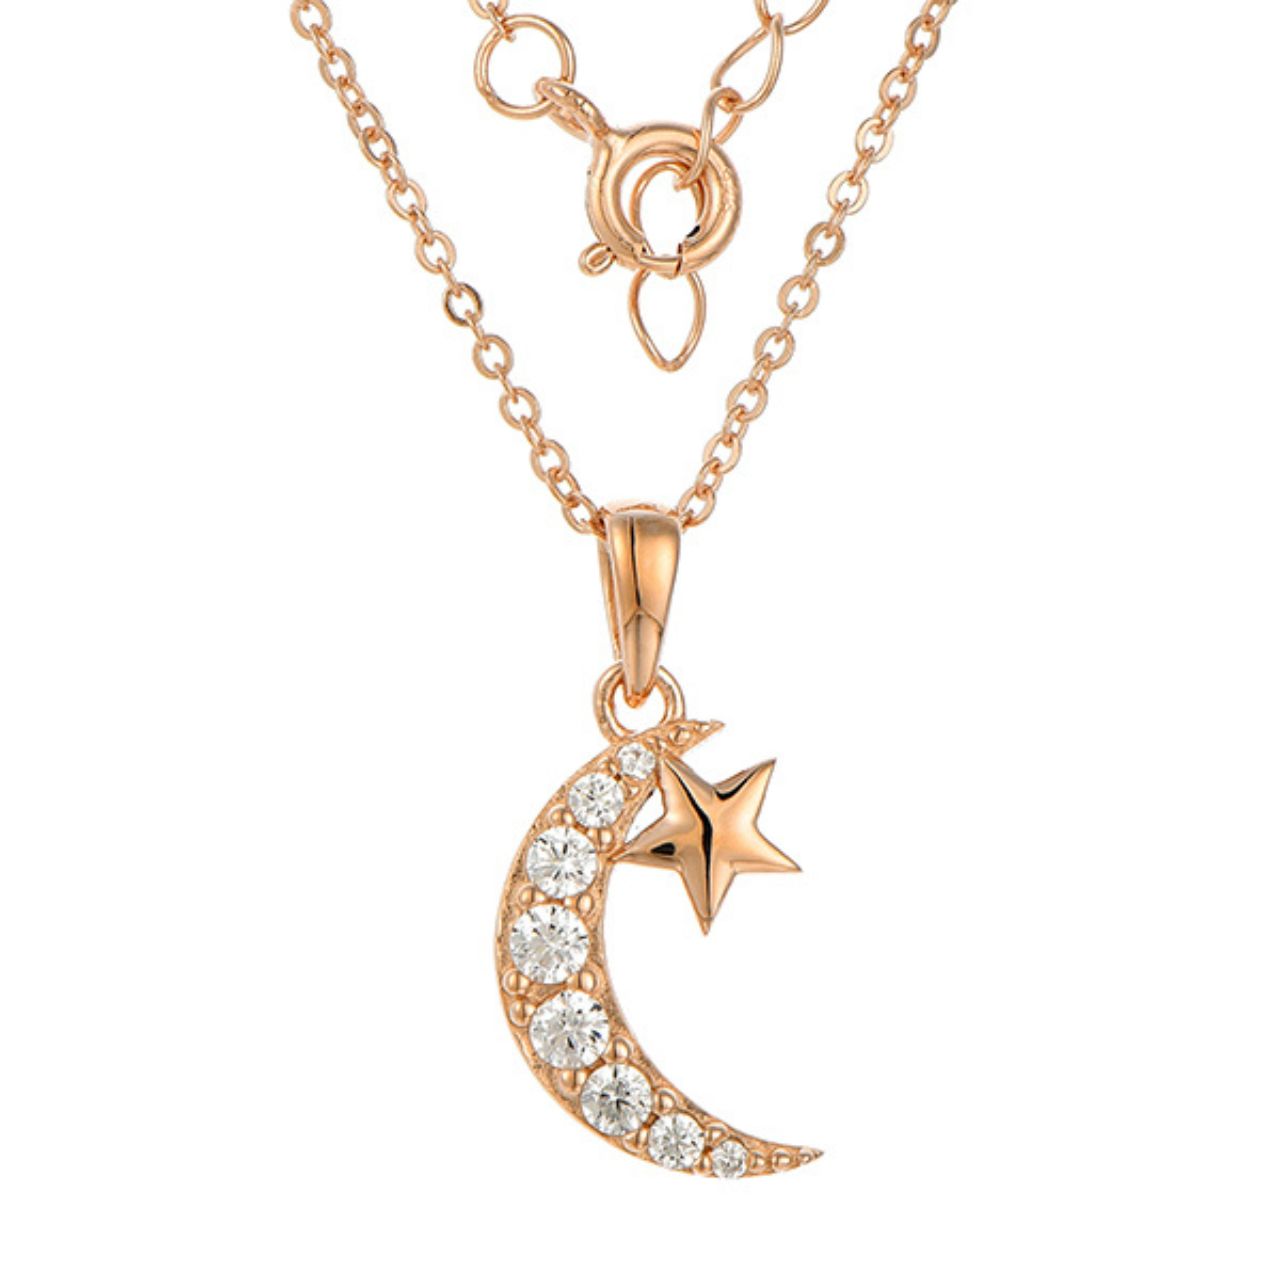 Rose Gold Moon and Star Necklace by Kilkenny Silver  Rose gold plated sterling silver moon and star stud necklace with clear coloured cubic zirconia stones.